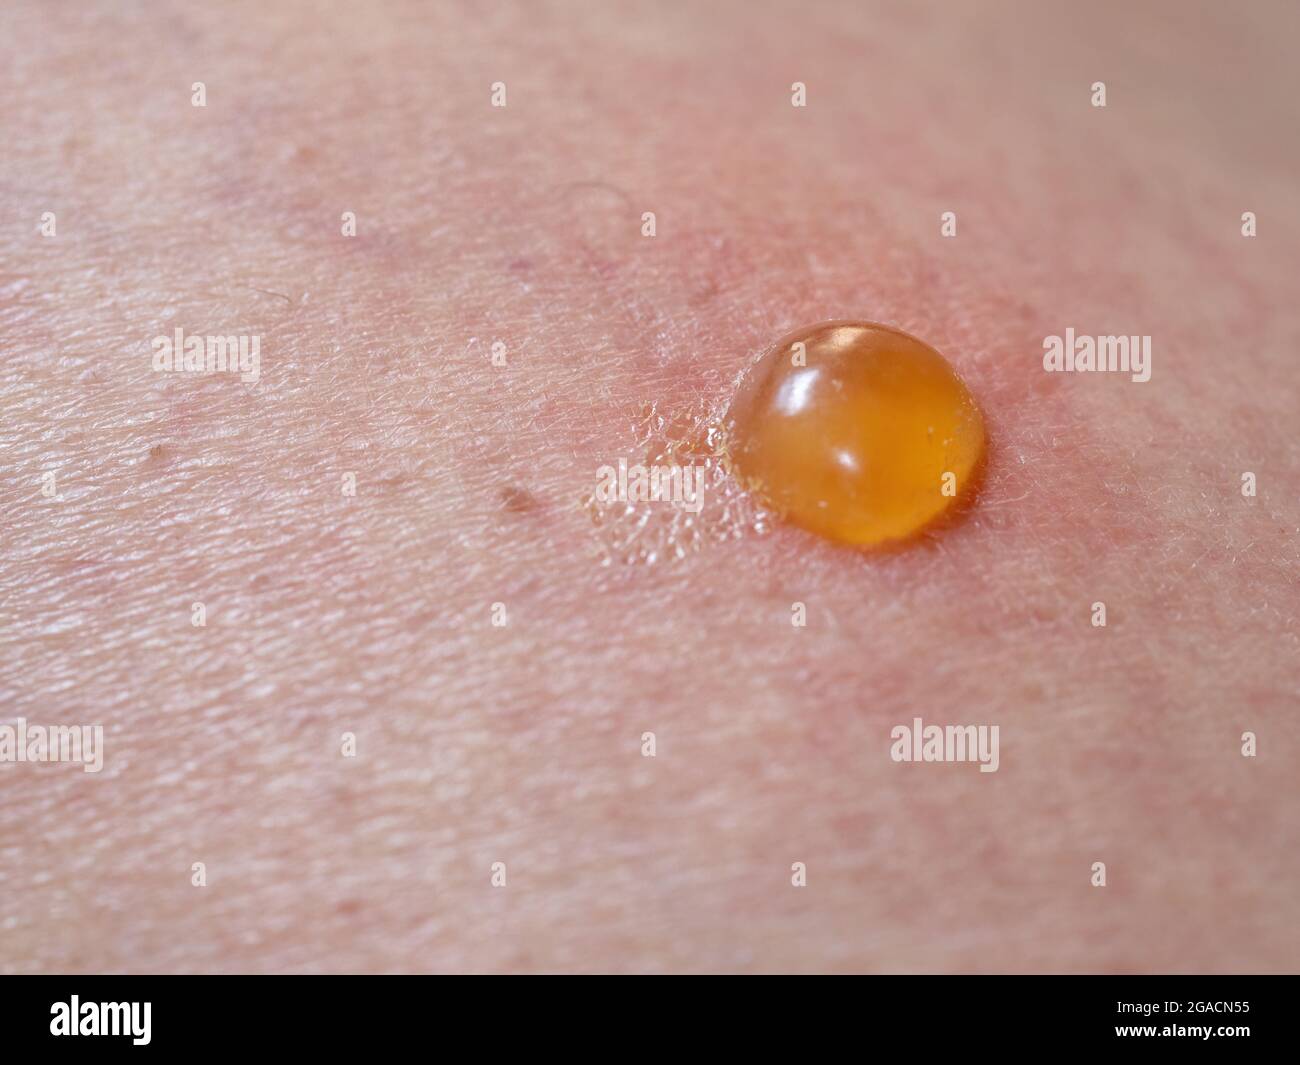 Insect bite on skin with blister Stock Photo - Alamy